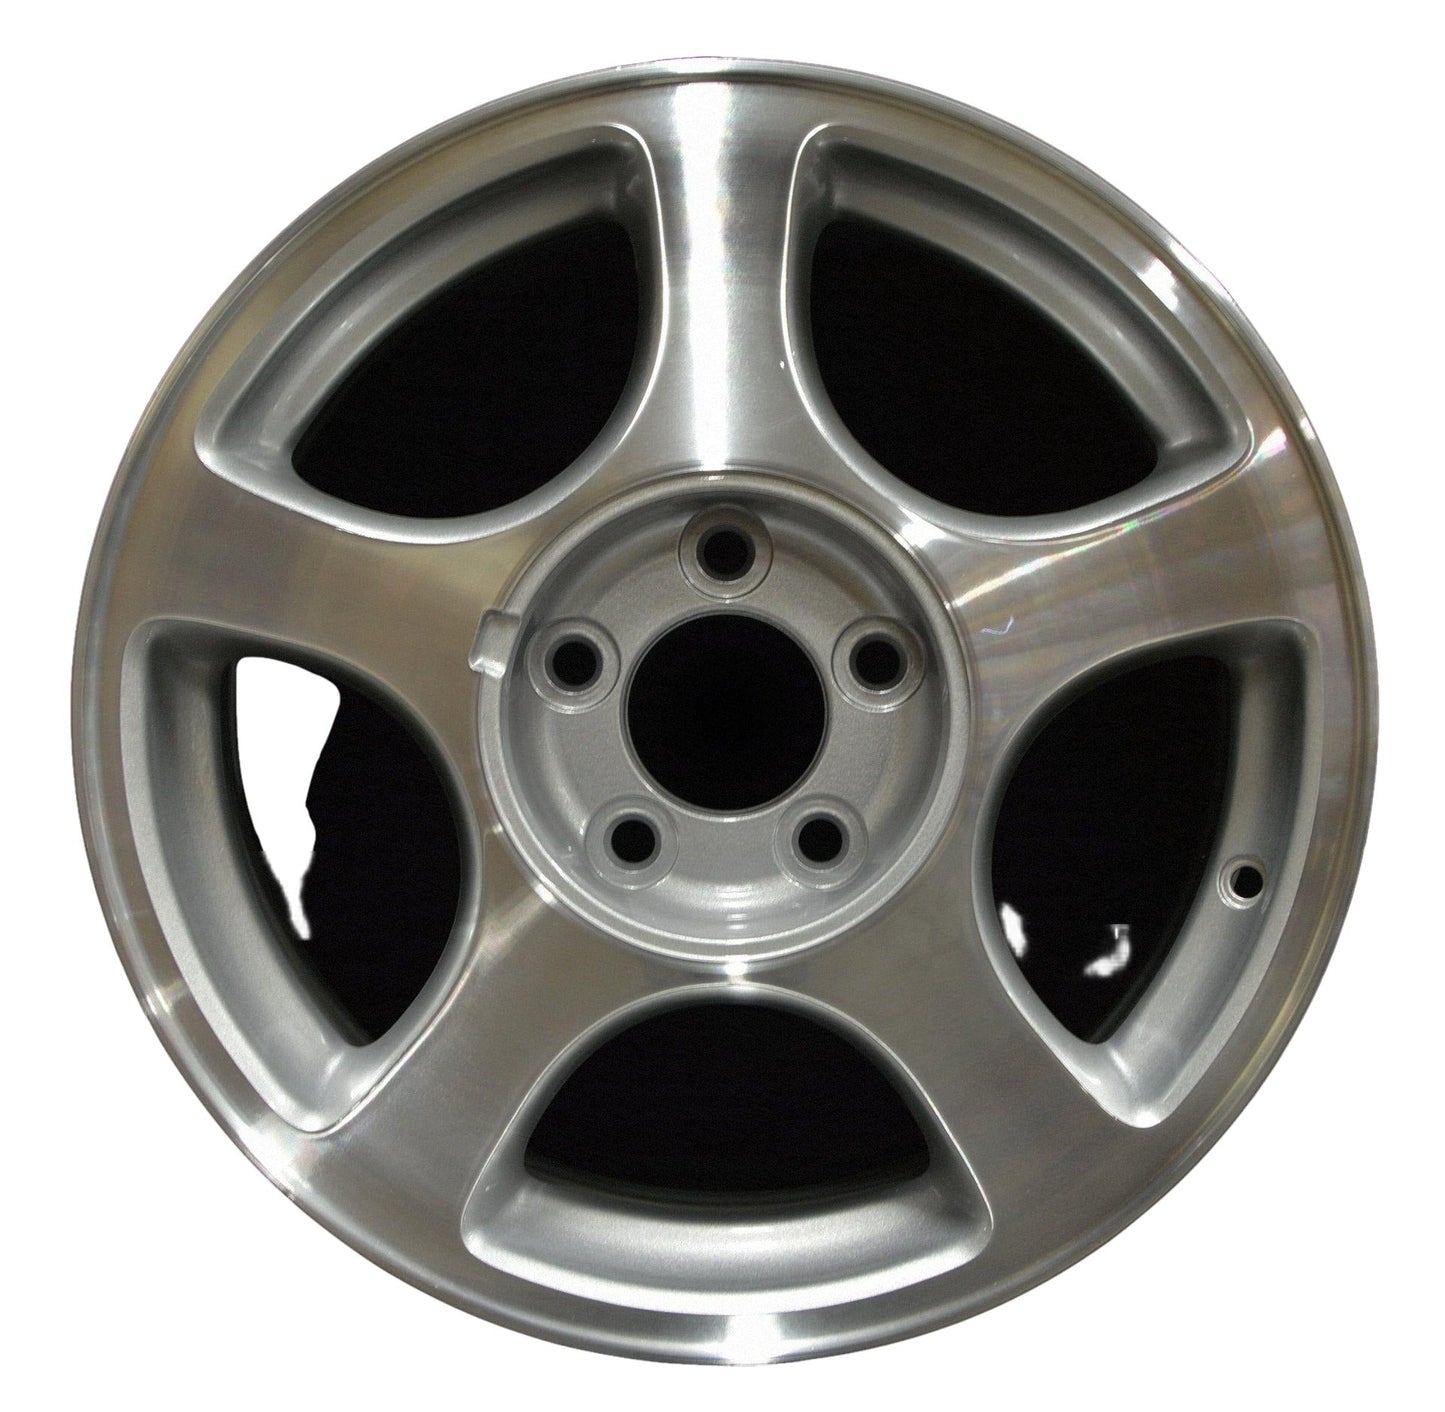 Ford Mustang  1999, 2000, 2001 Factory OEM Car Wheel Size 16x7.5 Alloy WAO.3375B.PS02.MA